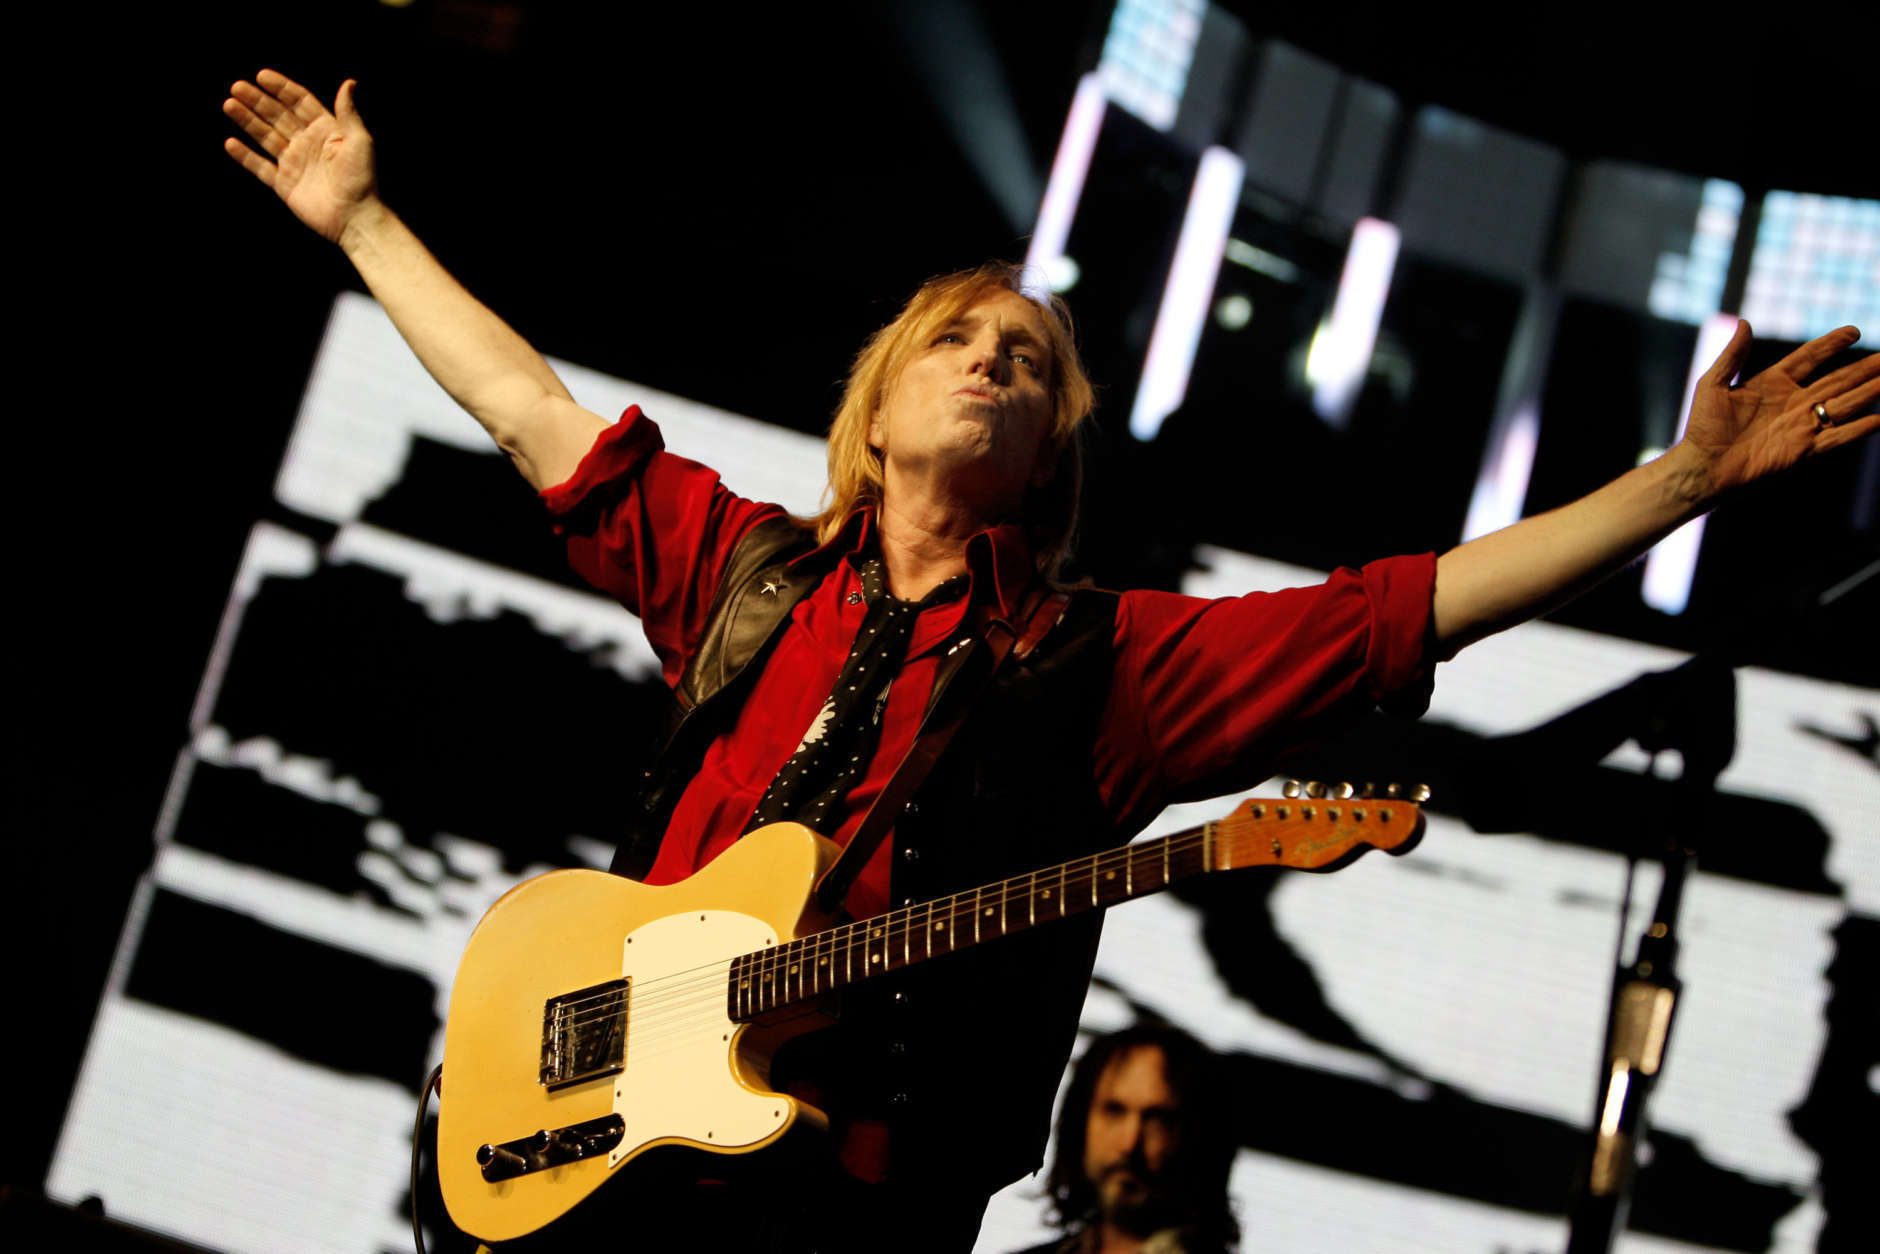 Tom Petty, center, and The Heartbreakers perform in front of a packed house at Madison Square Garden Tuesday, June 20, 2006, in New York.  Tom Petty's third solo album 'Highway Companion' is scheduled to be released on July 25, 2006.  (AP Photo/Jason DeCrow)